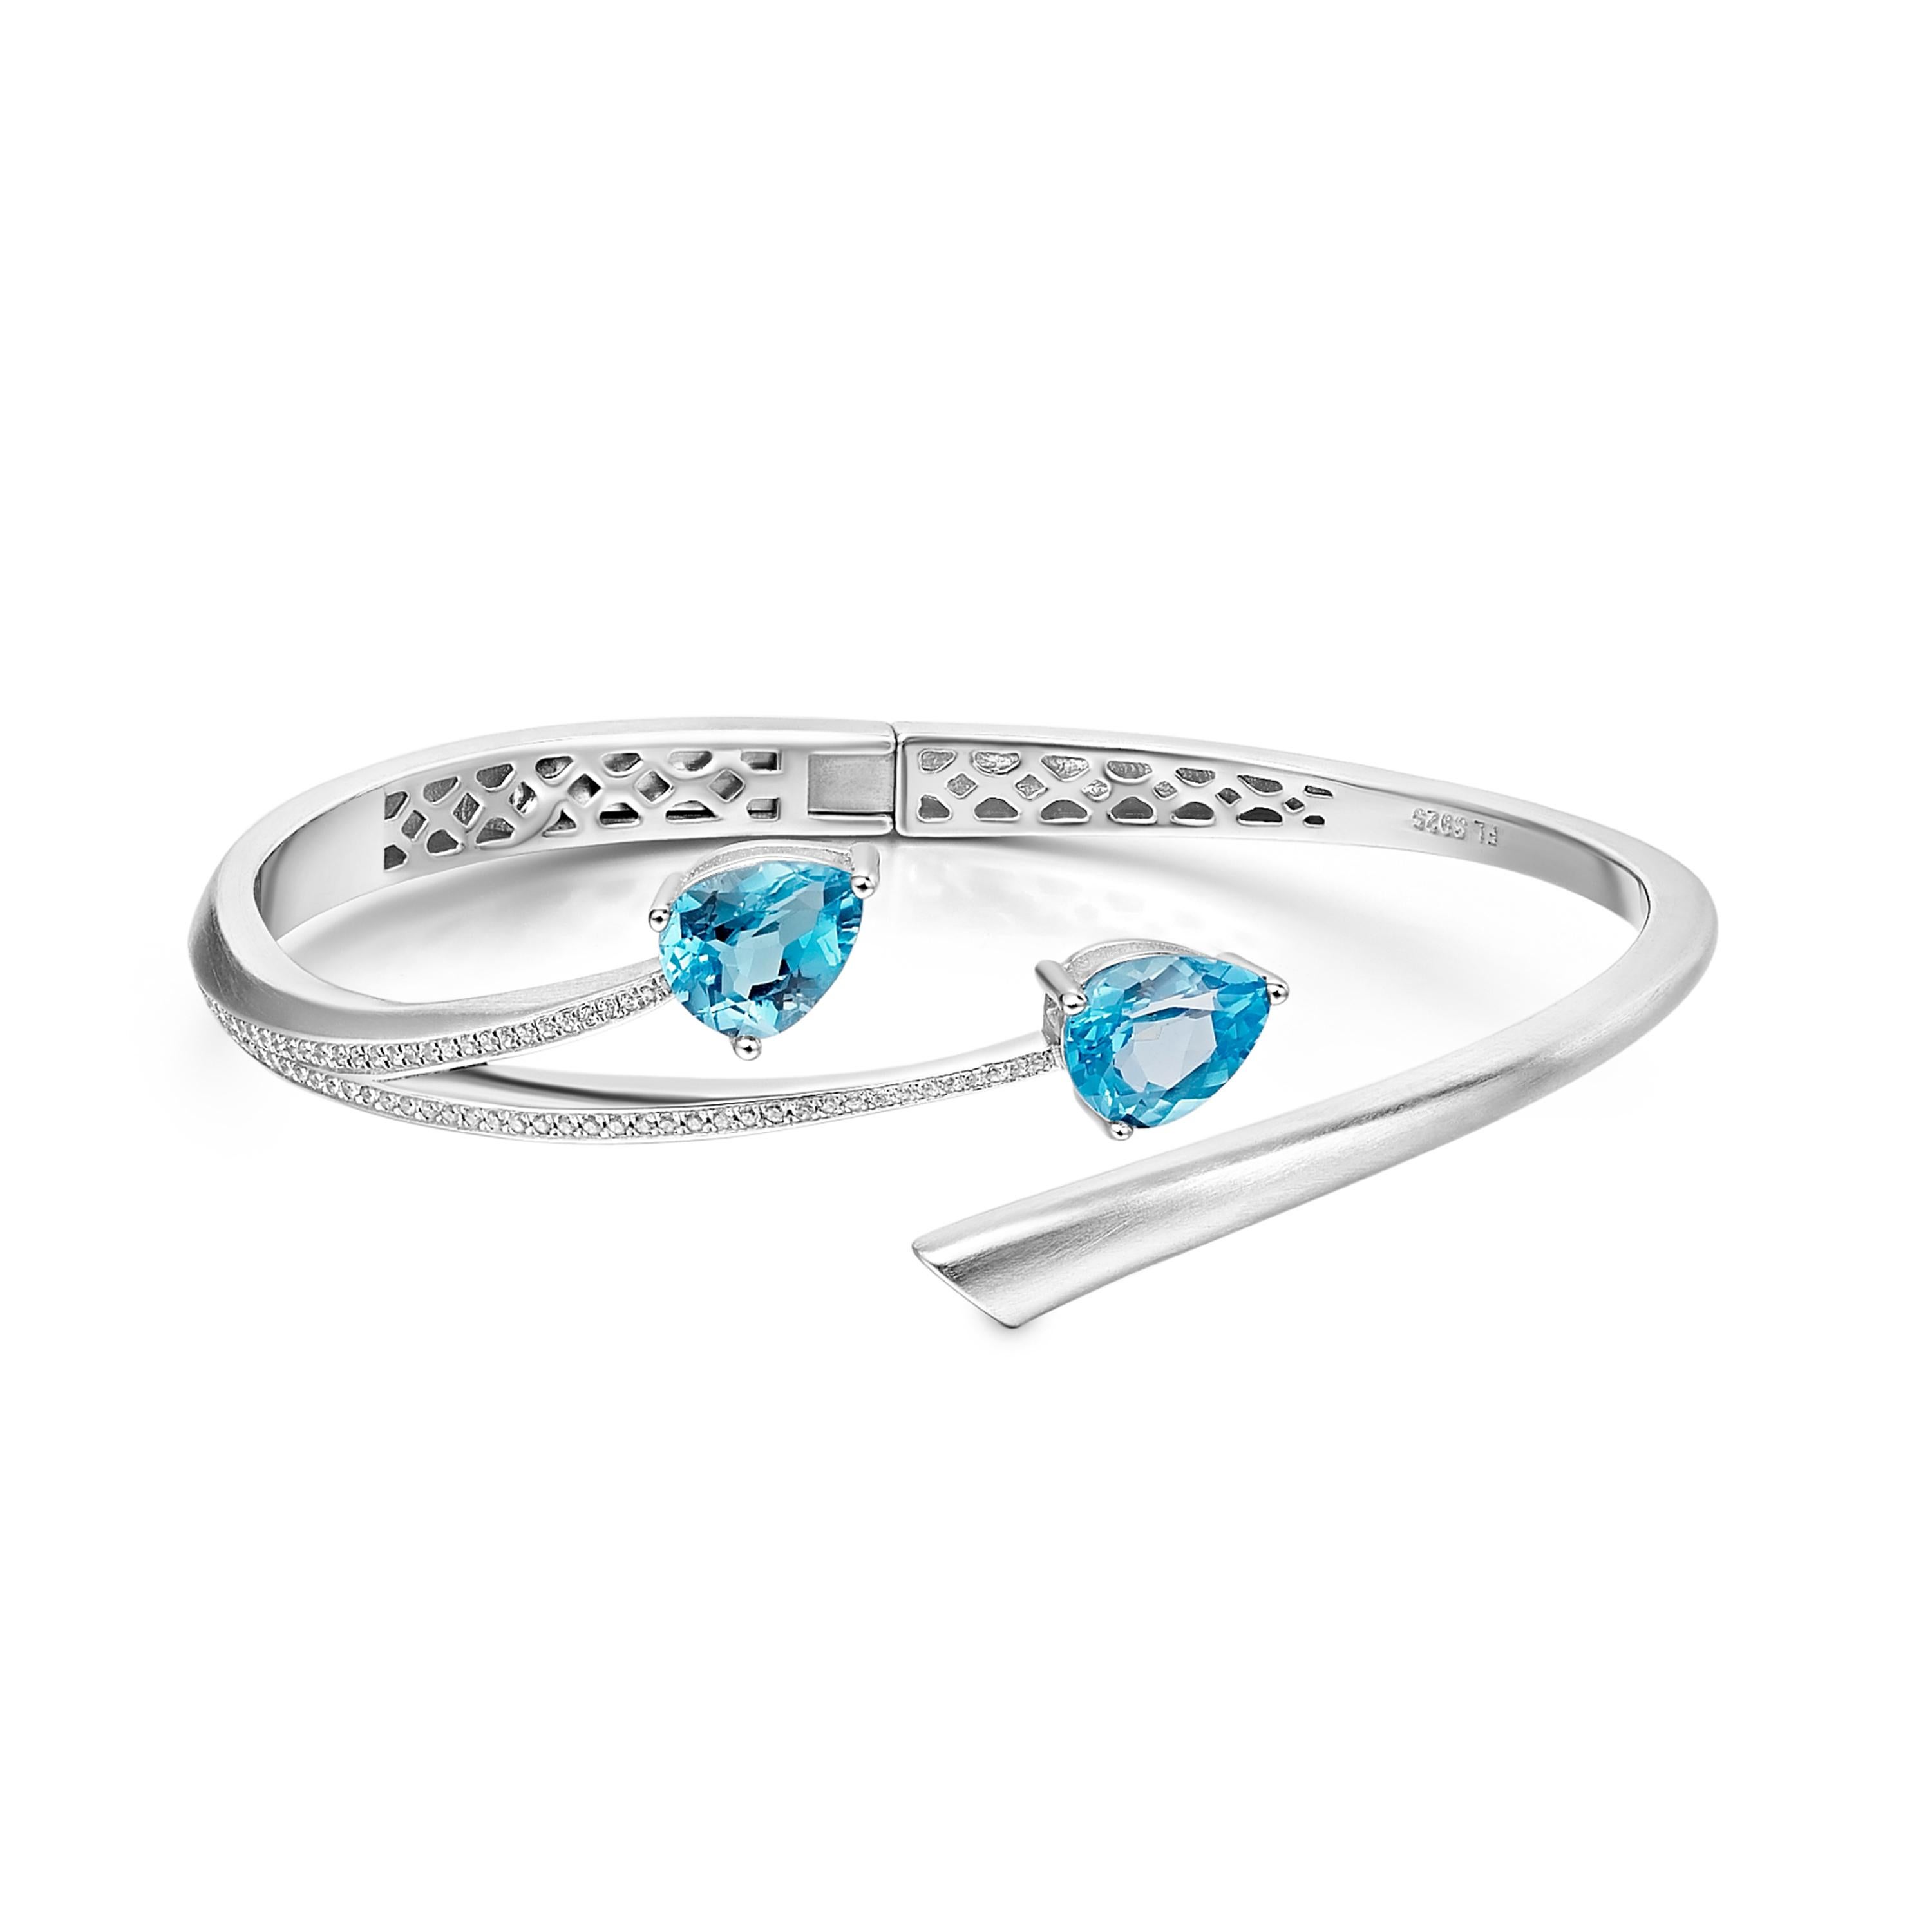 Description:
Shooting Star bangle with pear cut blue topaz and Hearts and Arrows* white cubic zirconia, set in matte polished white rhodium plate on sterling silver.

Inner diameter (LxW): small/medium = 56mm x 60 mm, large = 60mm x 65mm

*Hearts